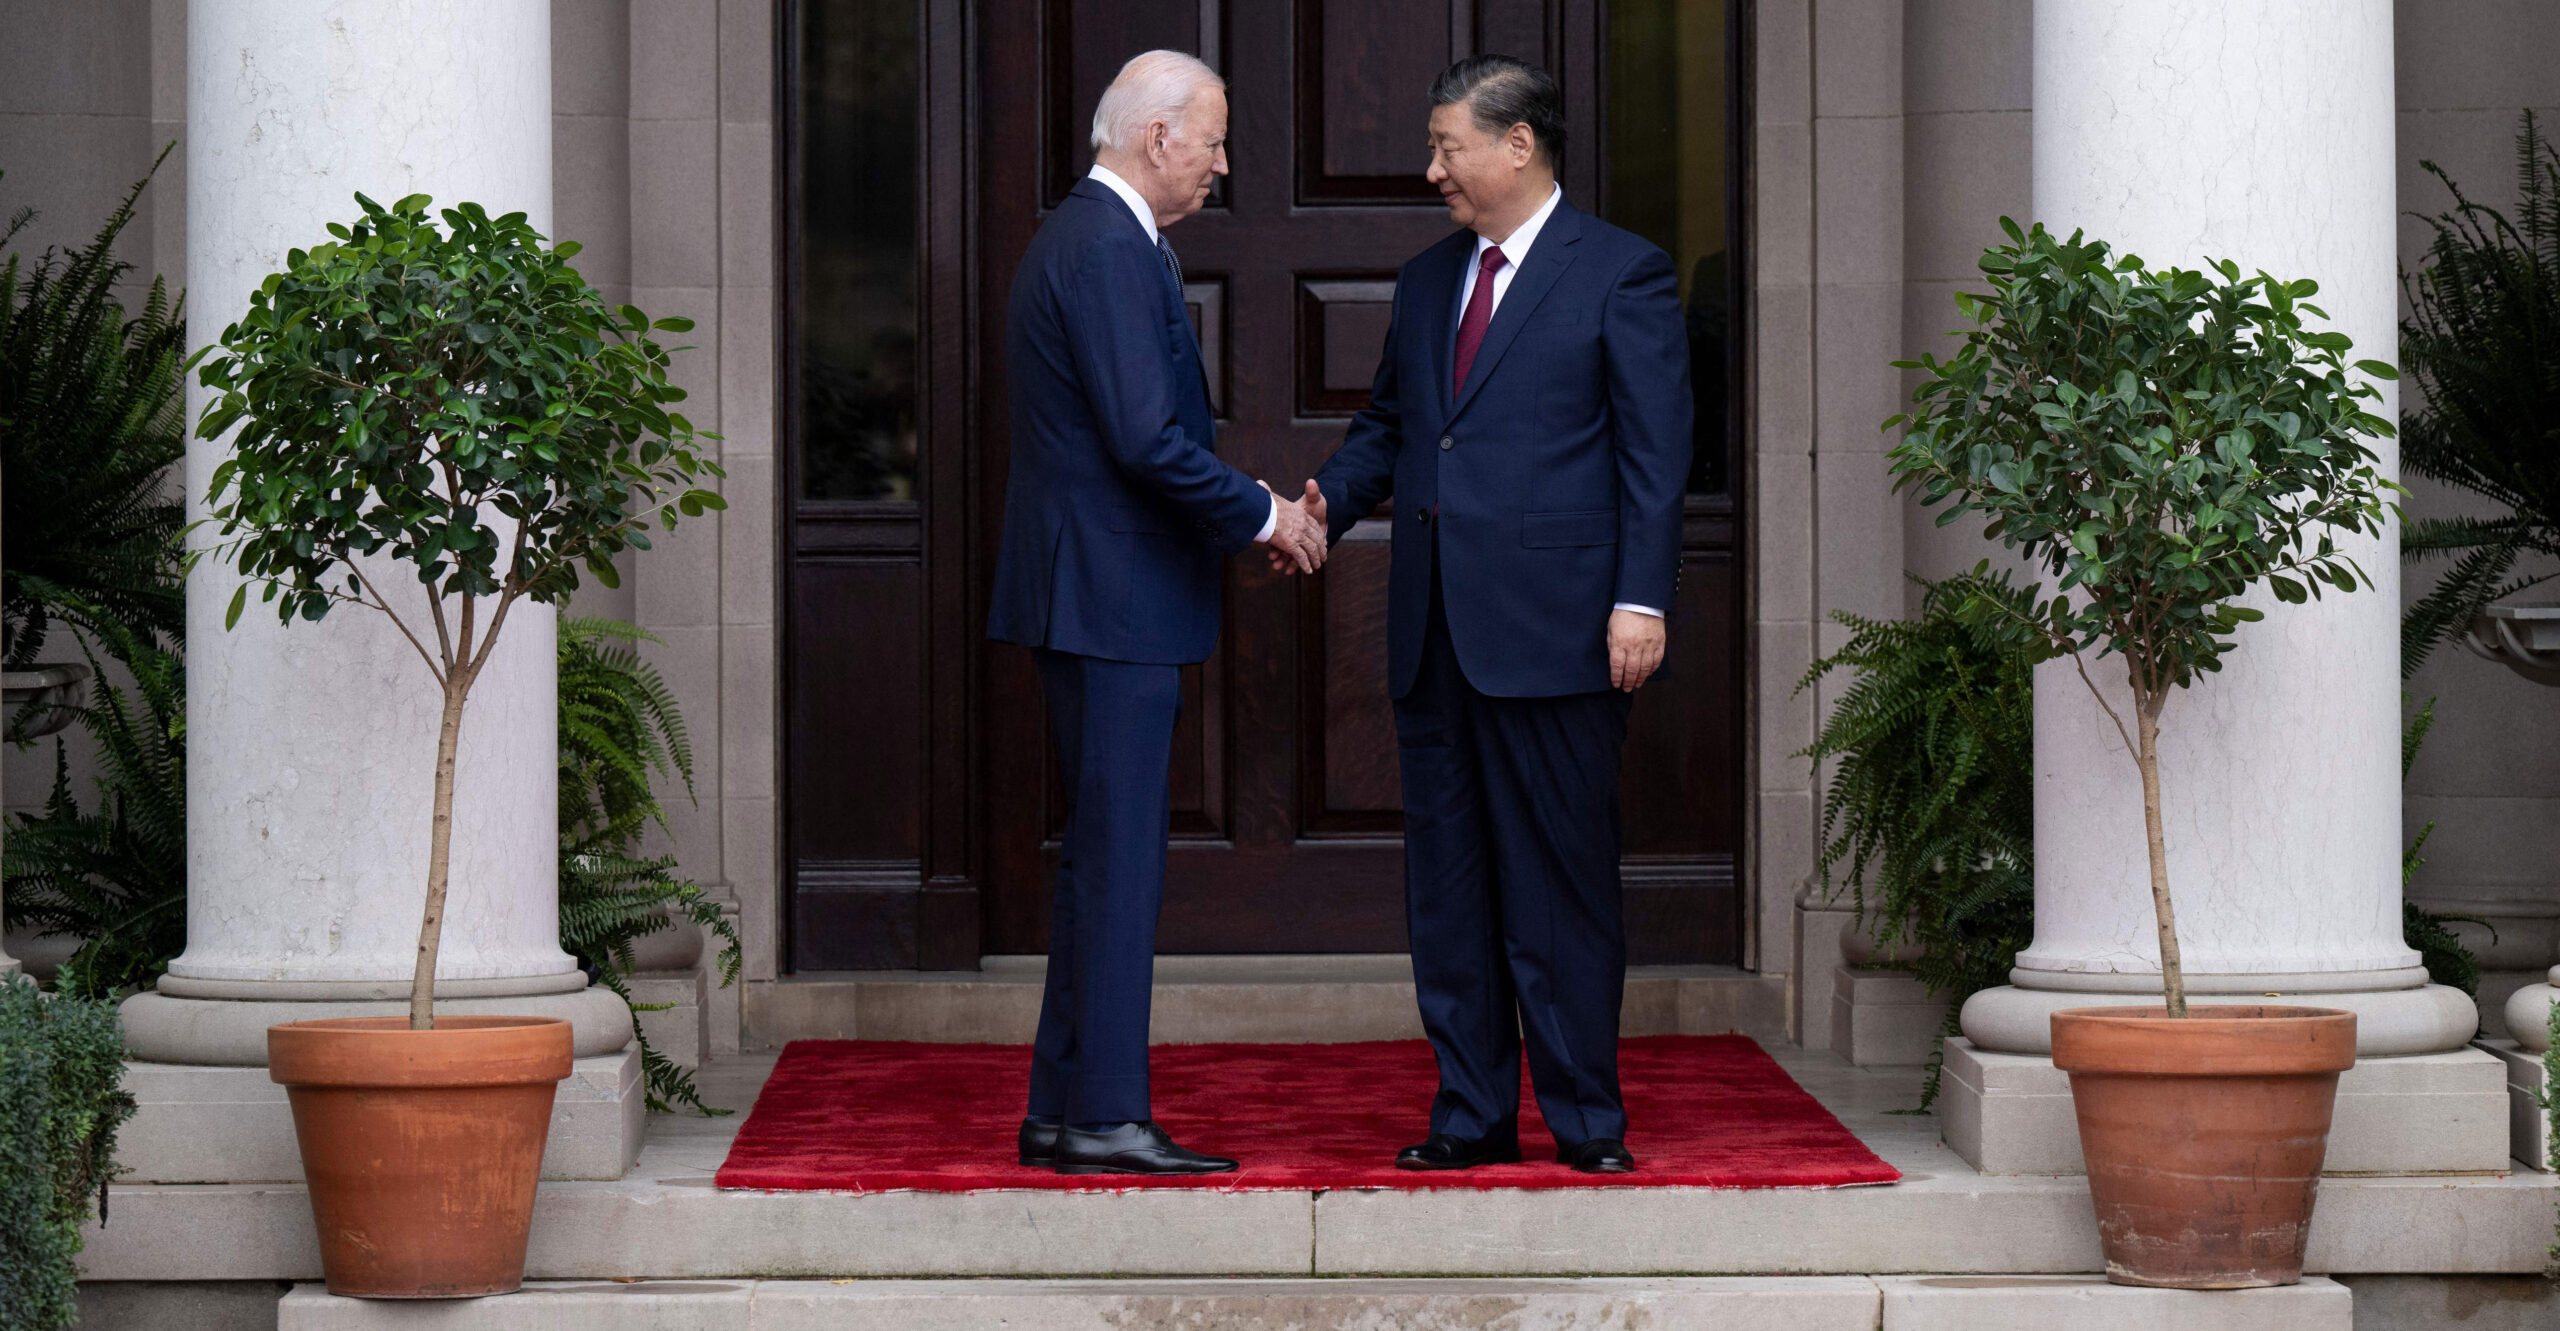 Less Than Nothing to Show for Failed Biden-Xi Summit